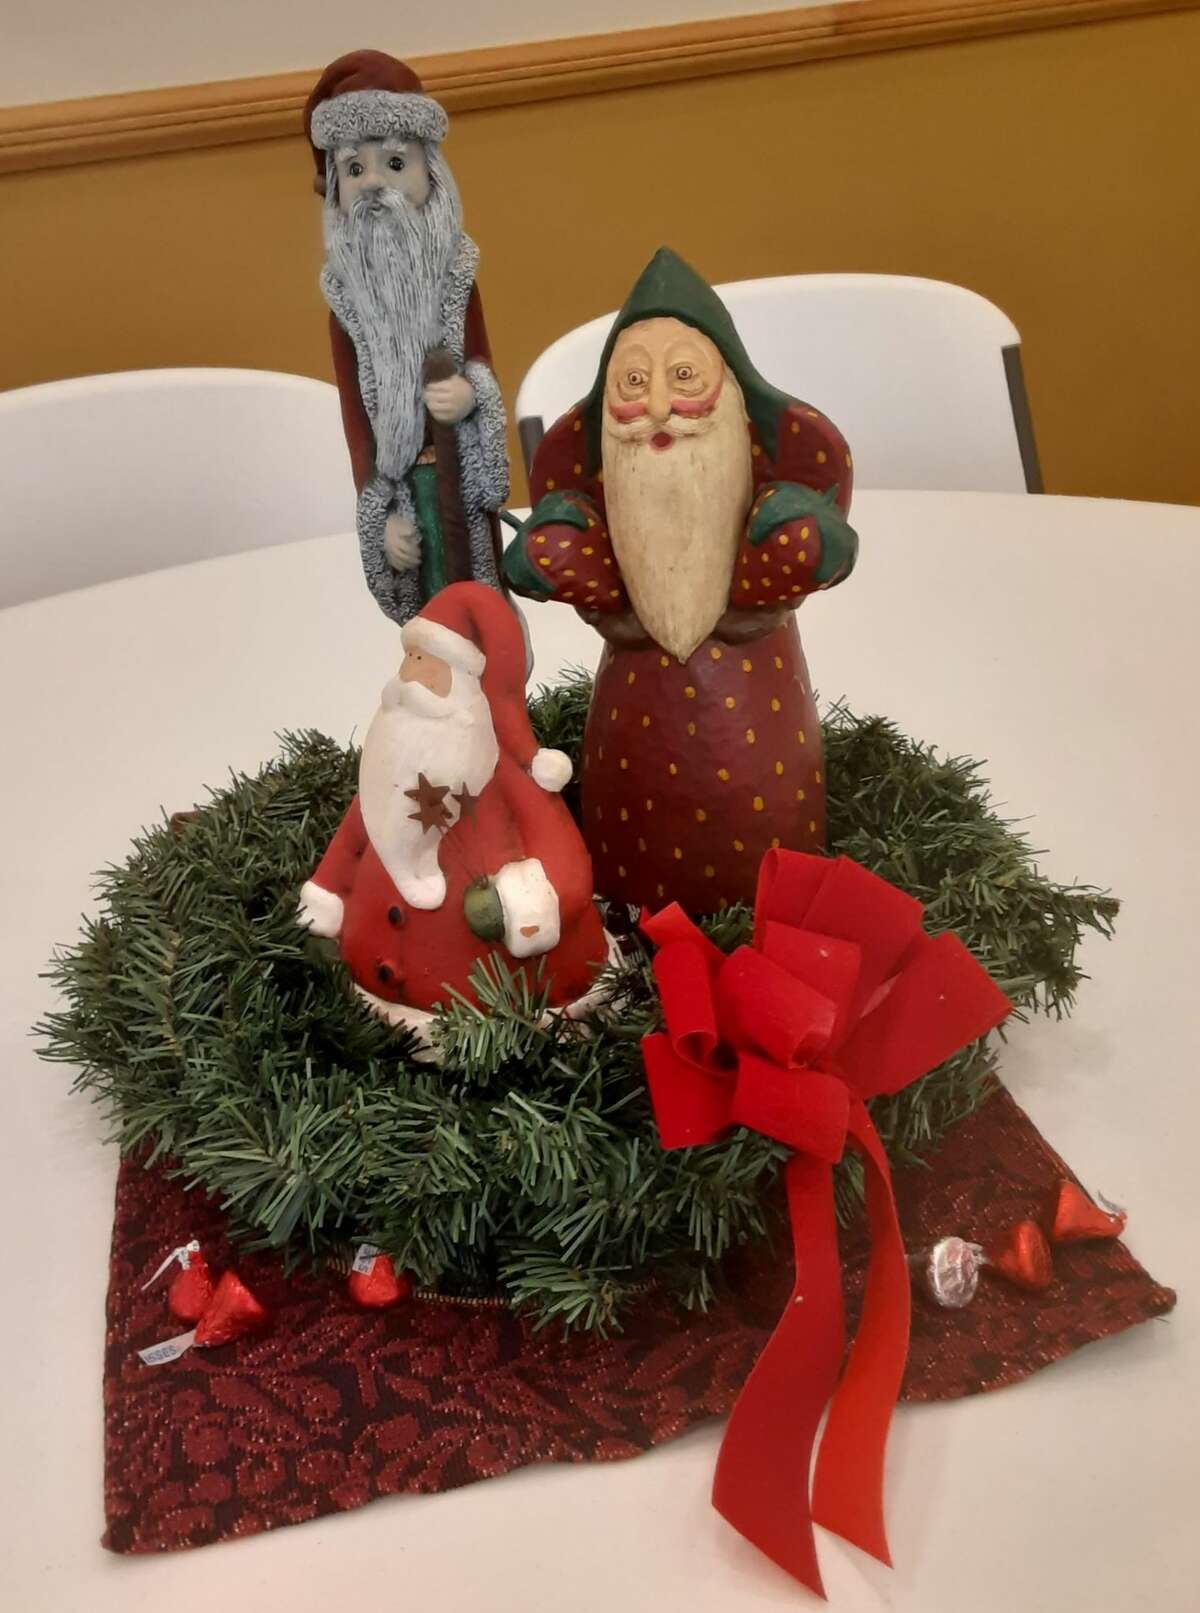 The Spirit of the Woods Garden Club, Inc. celebrated Christmas with a catered luncheon on Dec. 13. Tables were decorated with Santas from the collection of Dennis and Linda Otto. 